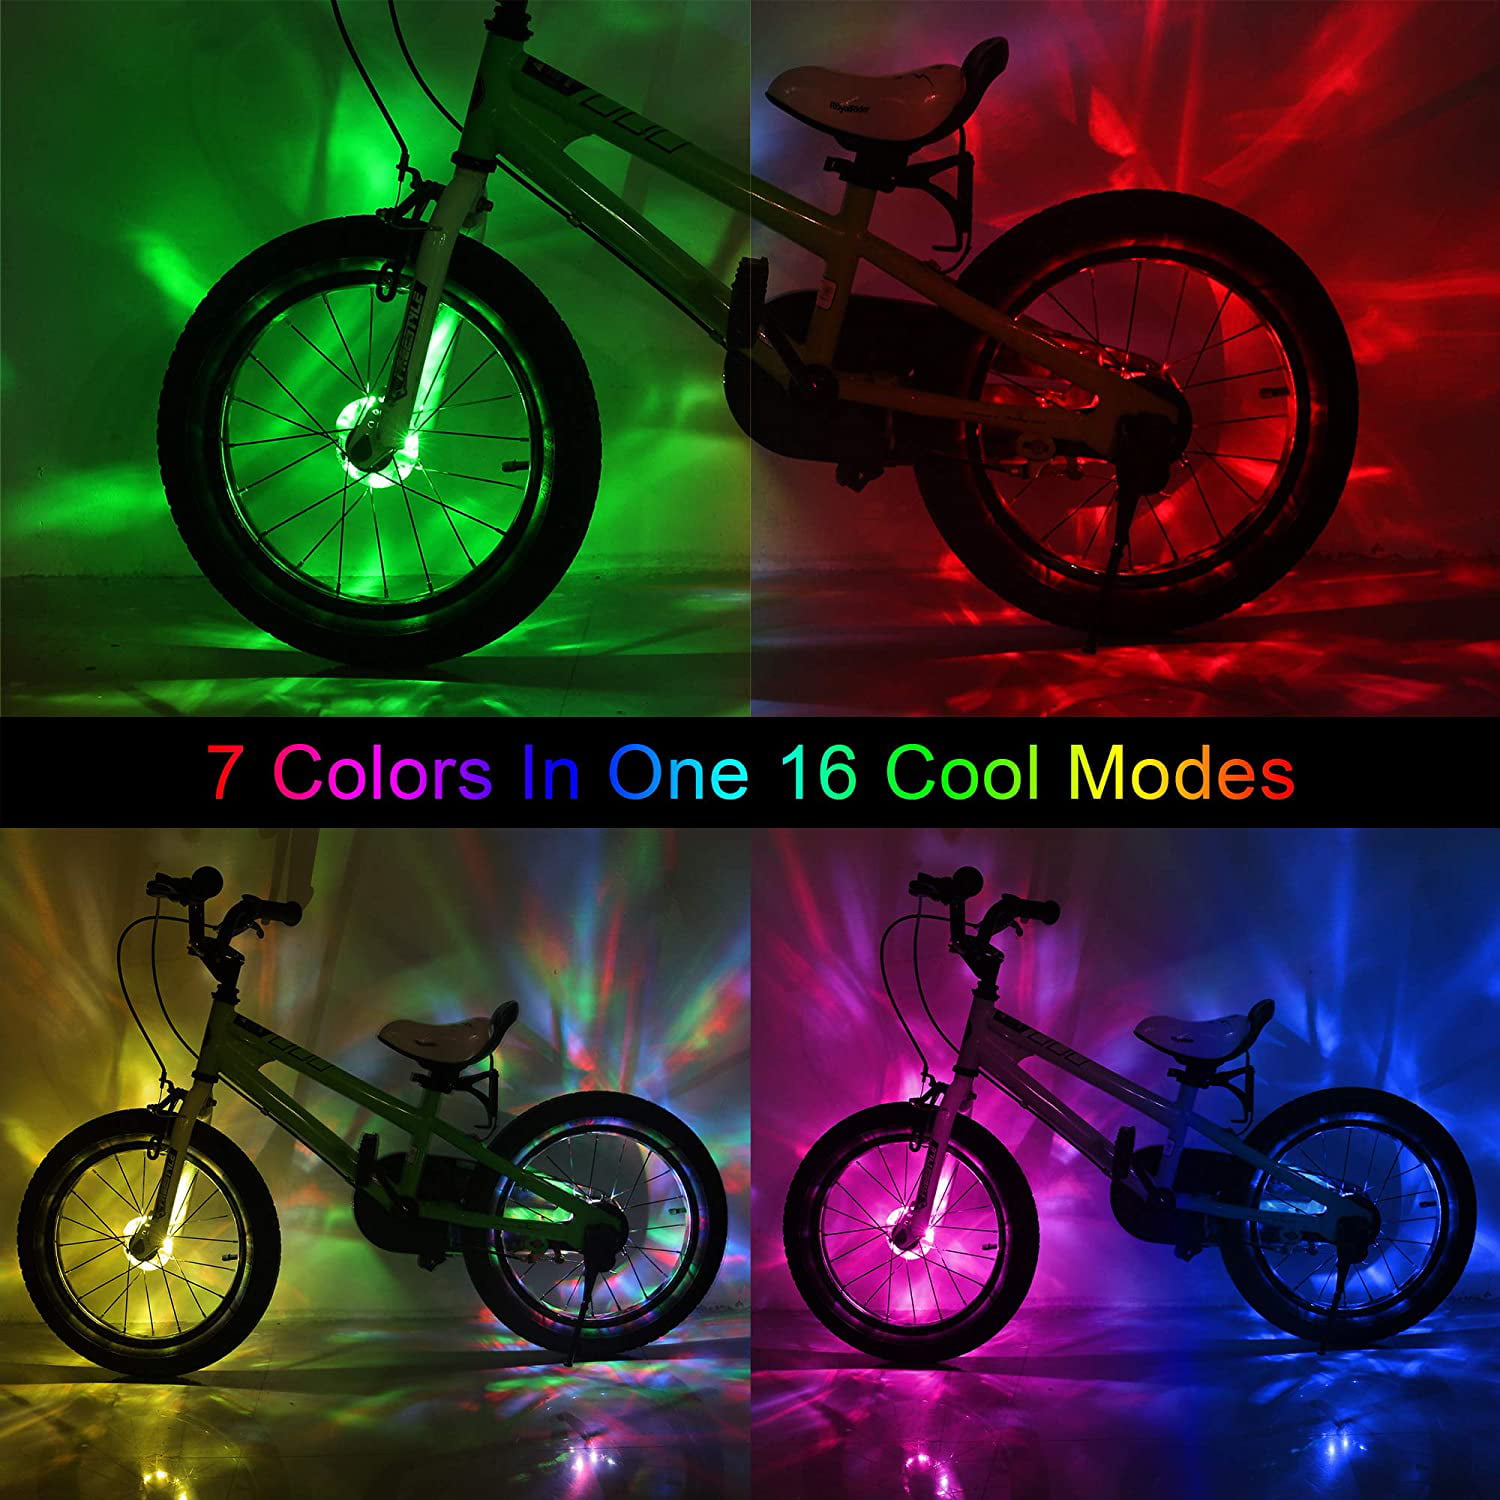 Waterproof LED Cycling Lights RENNICOCO Rechargeable Bike Wheel Hub Lights Colorful Bicycle Spoke Lights for Safety Riding Warning and Decoration 